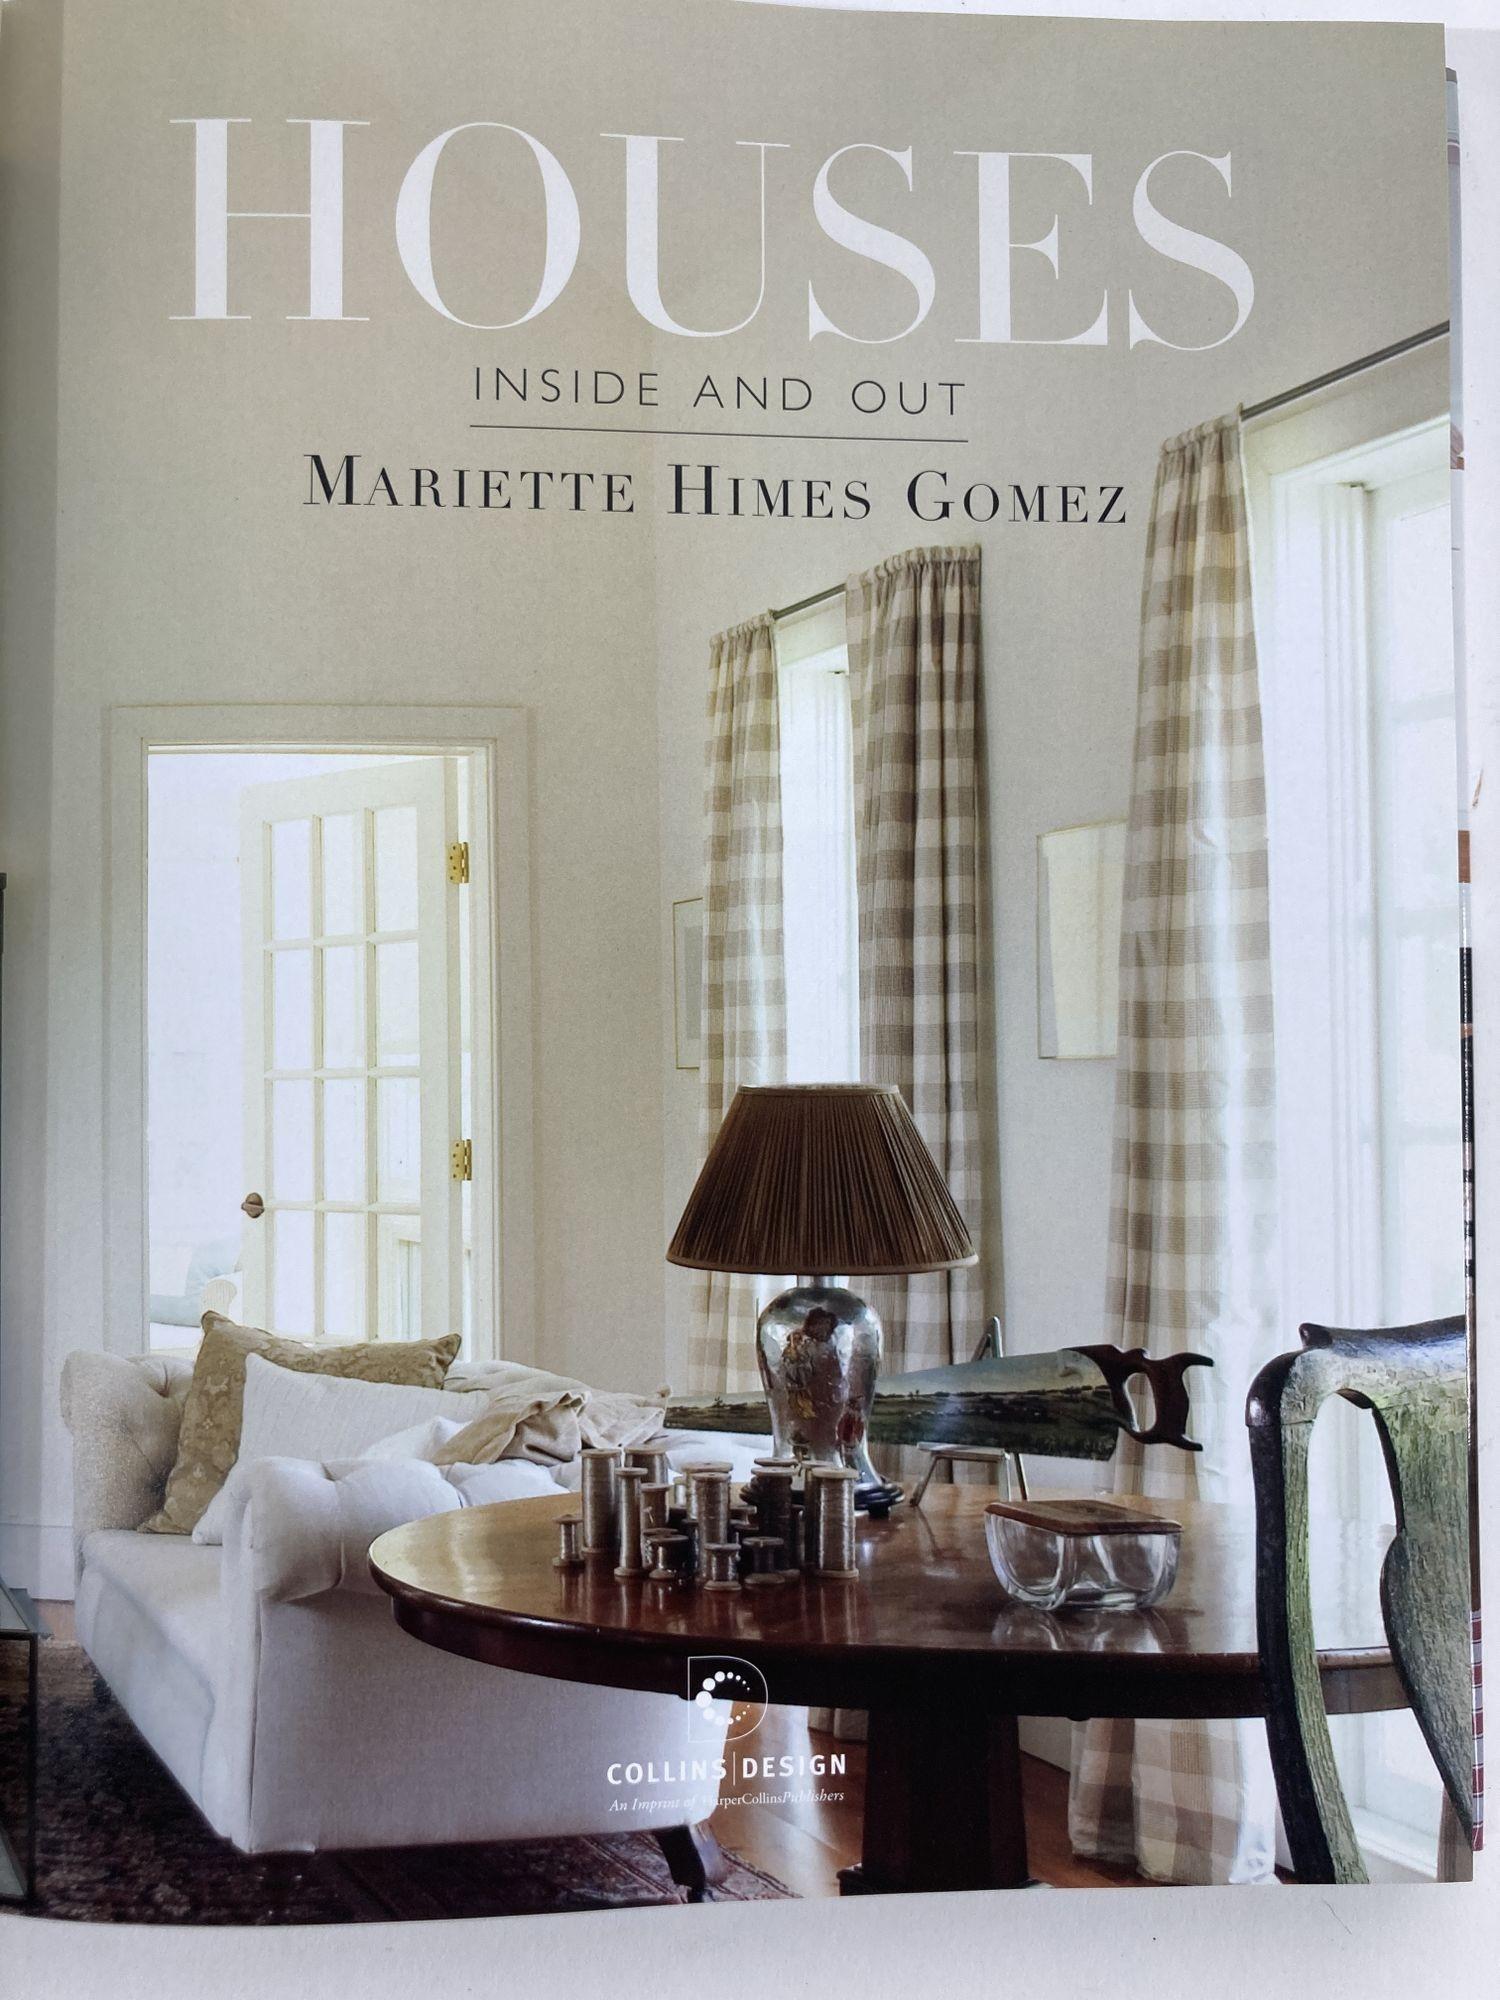 American Houses In and Out Hardcover Design Book by Mariette Himes Gomez